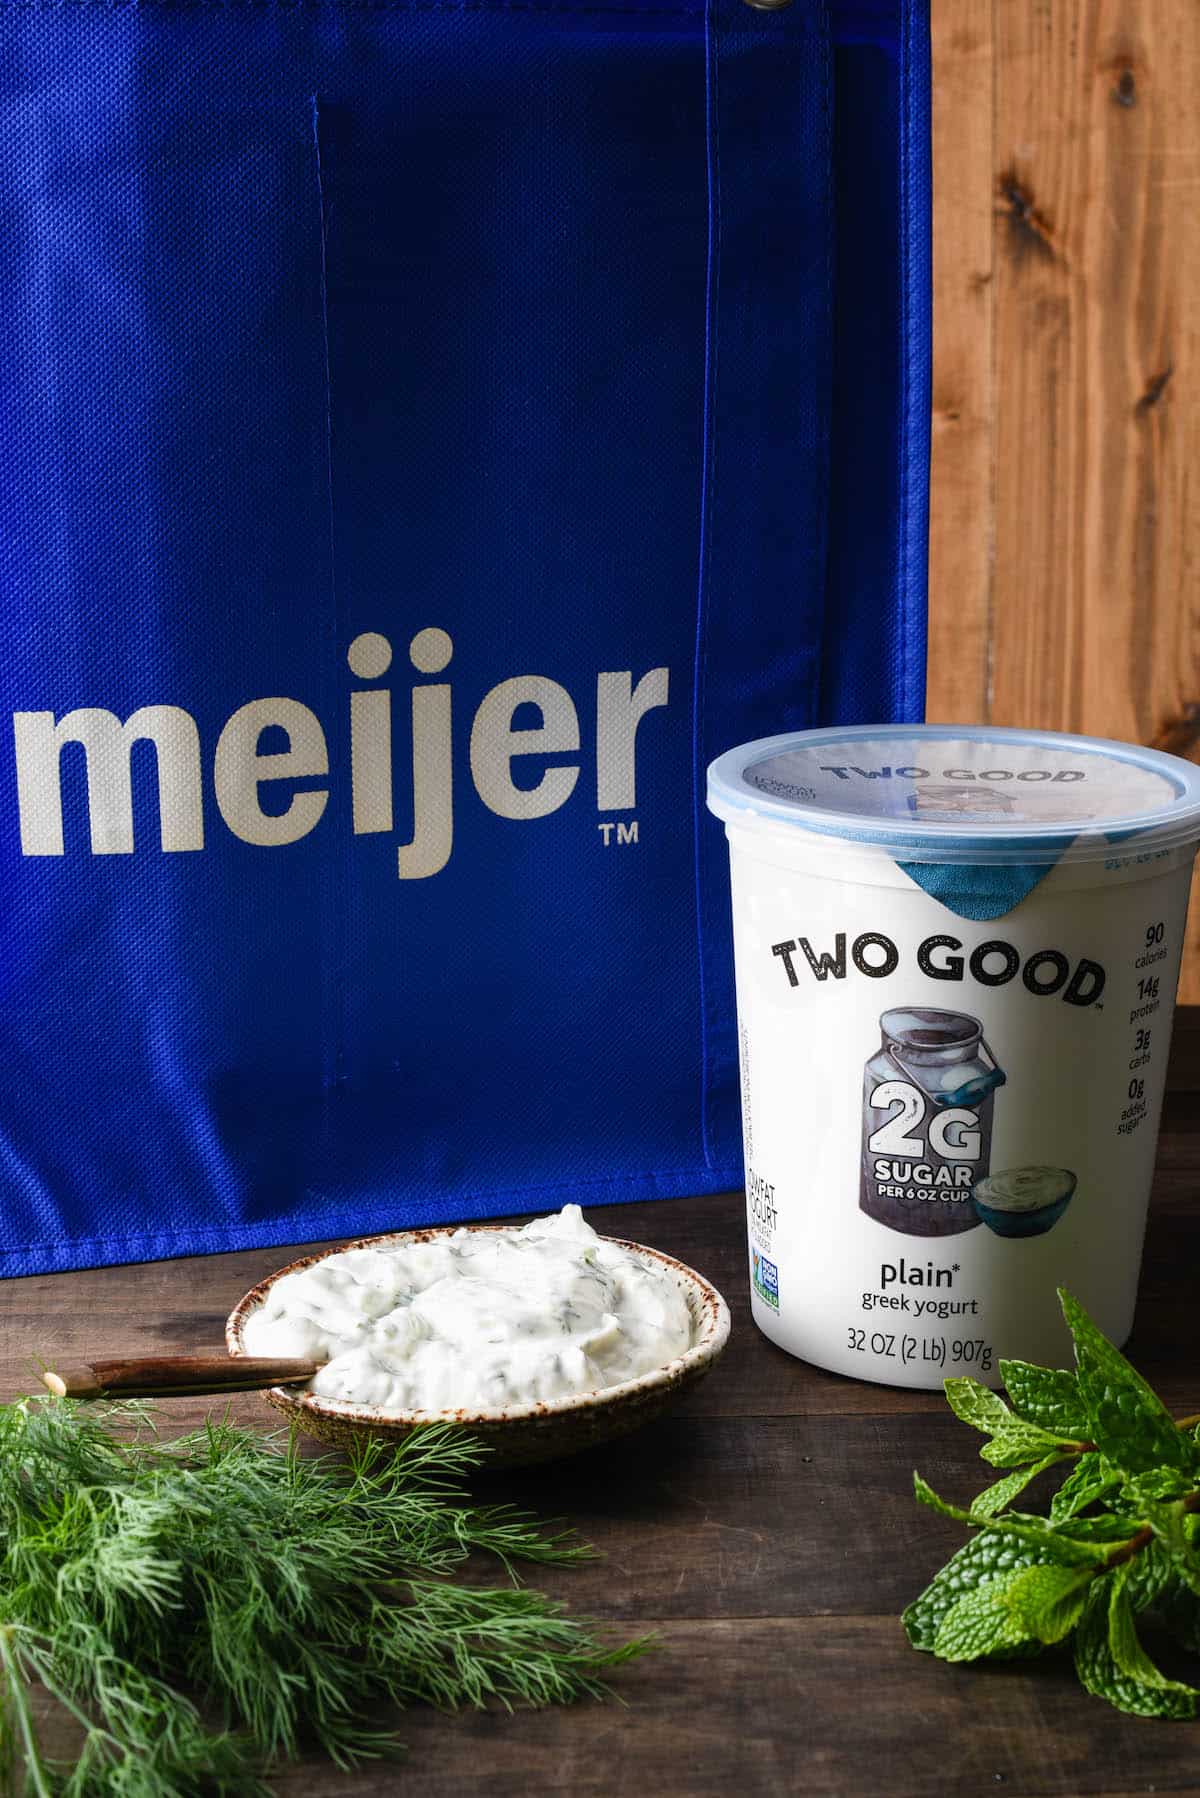 Container of Two Good Greek yogurt, bowl of yogurt sauce, mint and dill, with blue reusable Meijer bag in background.